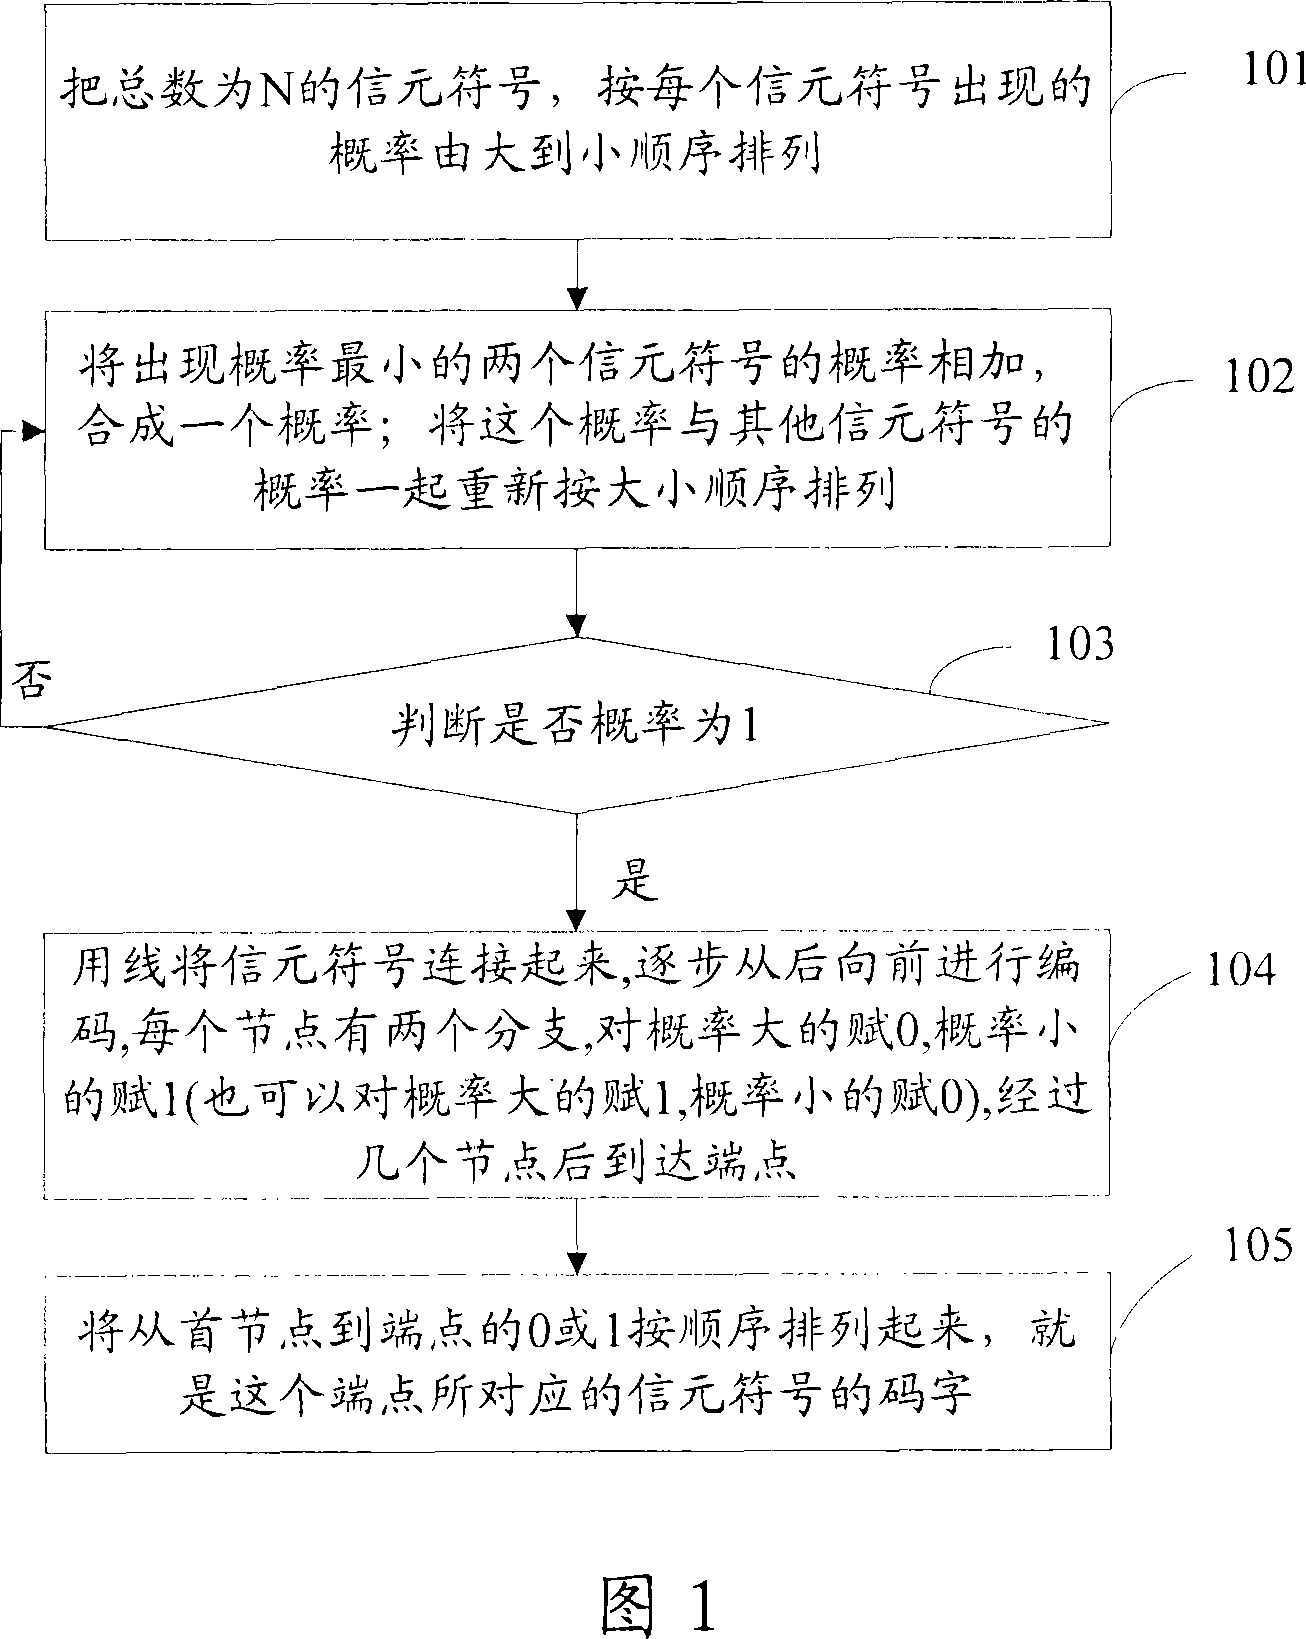 An optimized Huffman decoding method and device